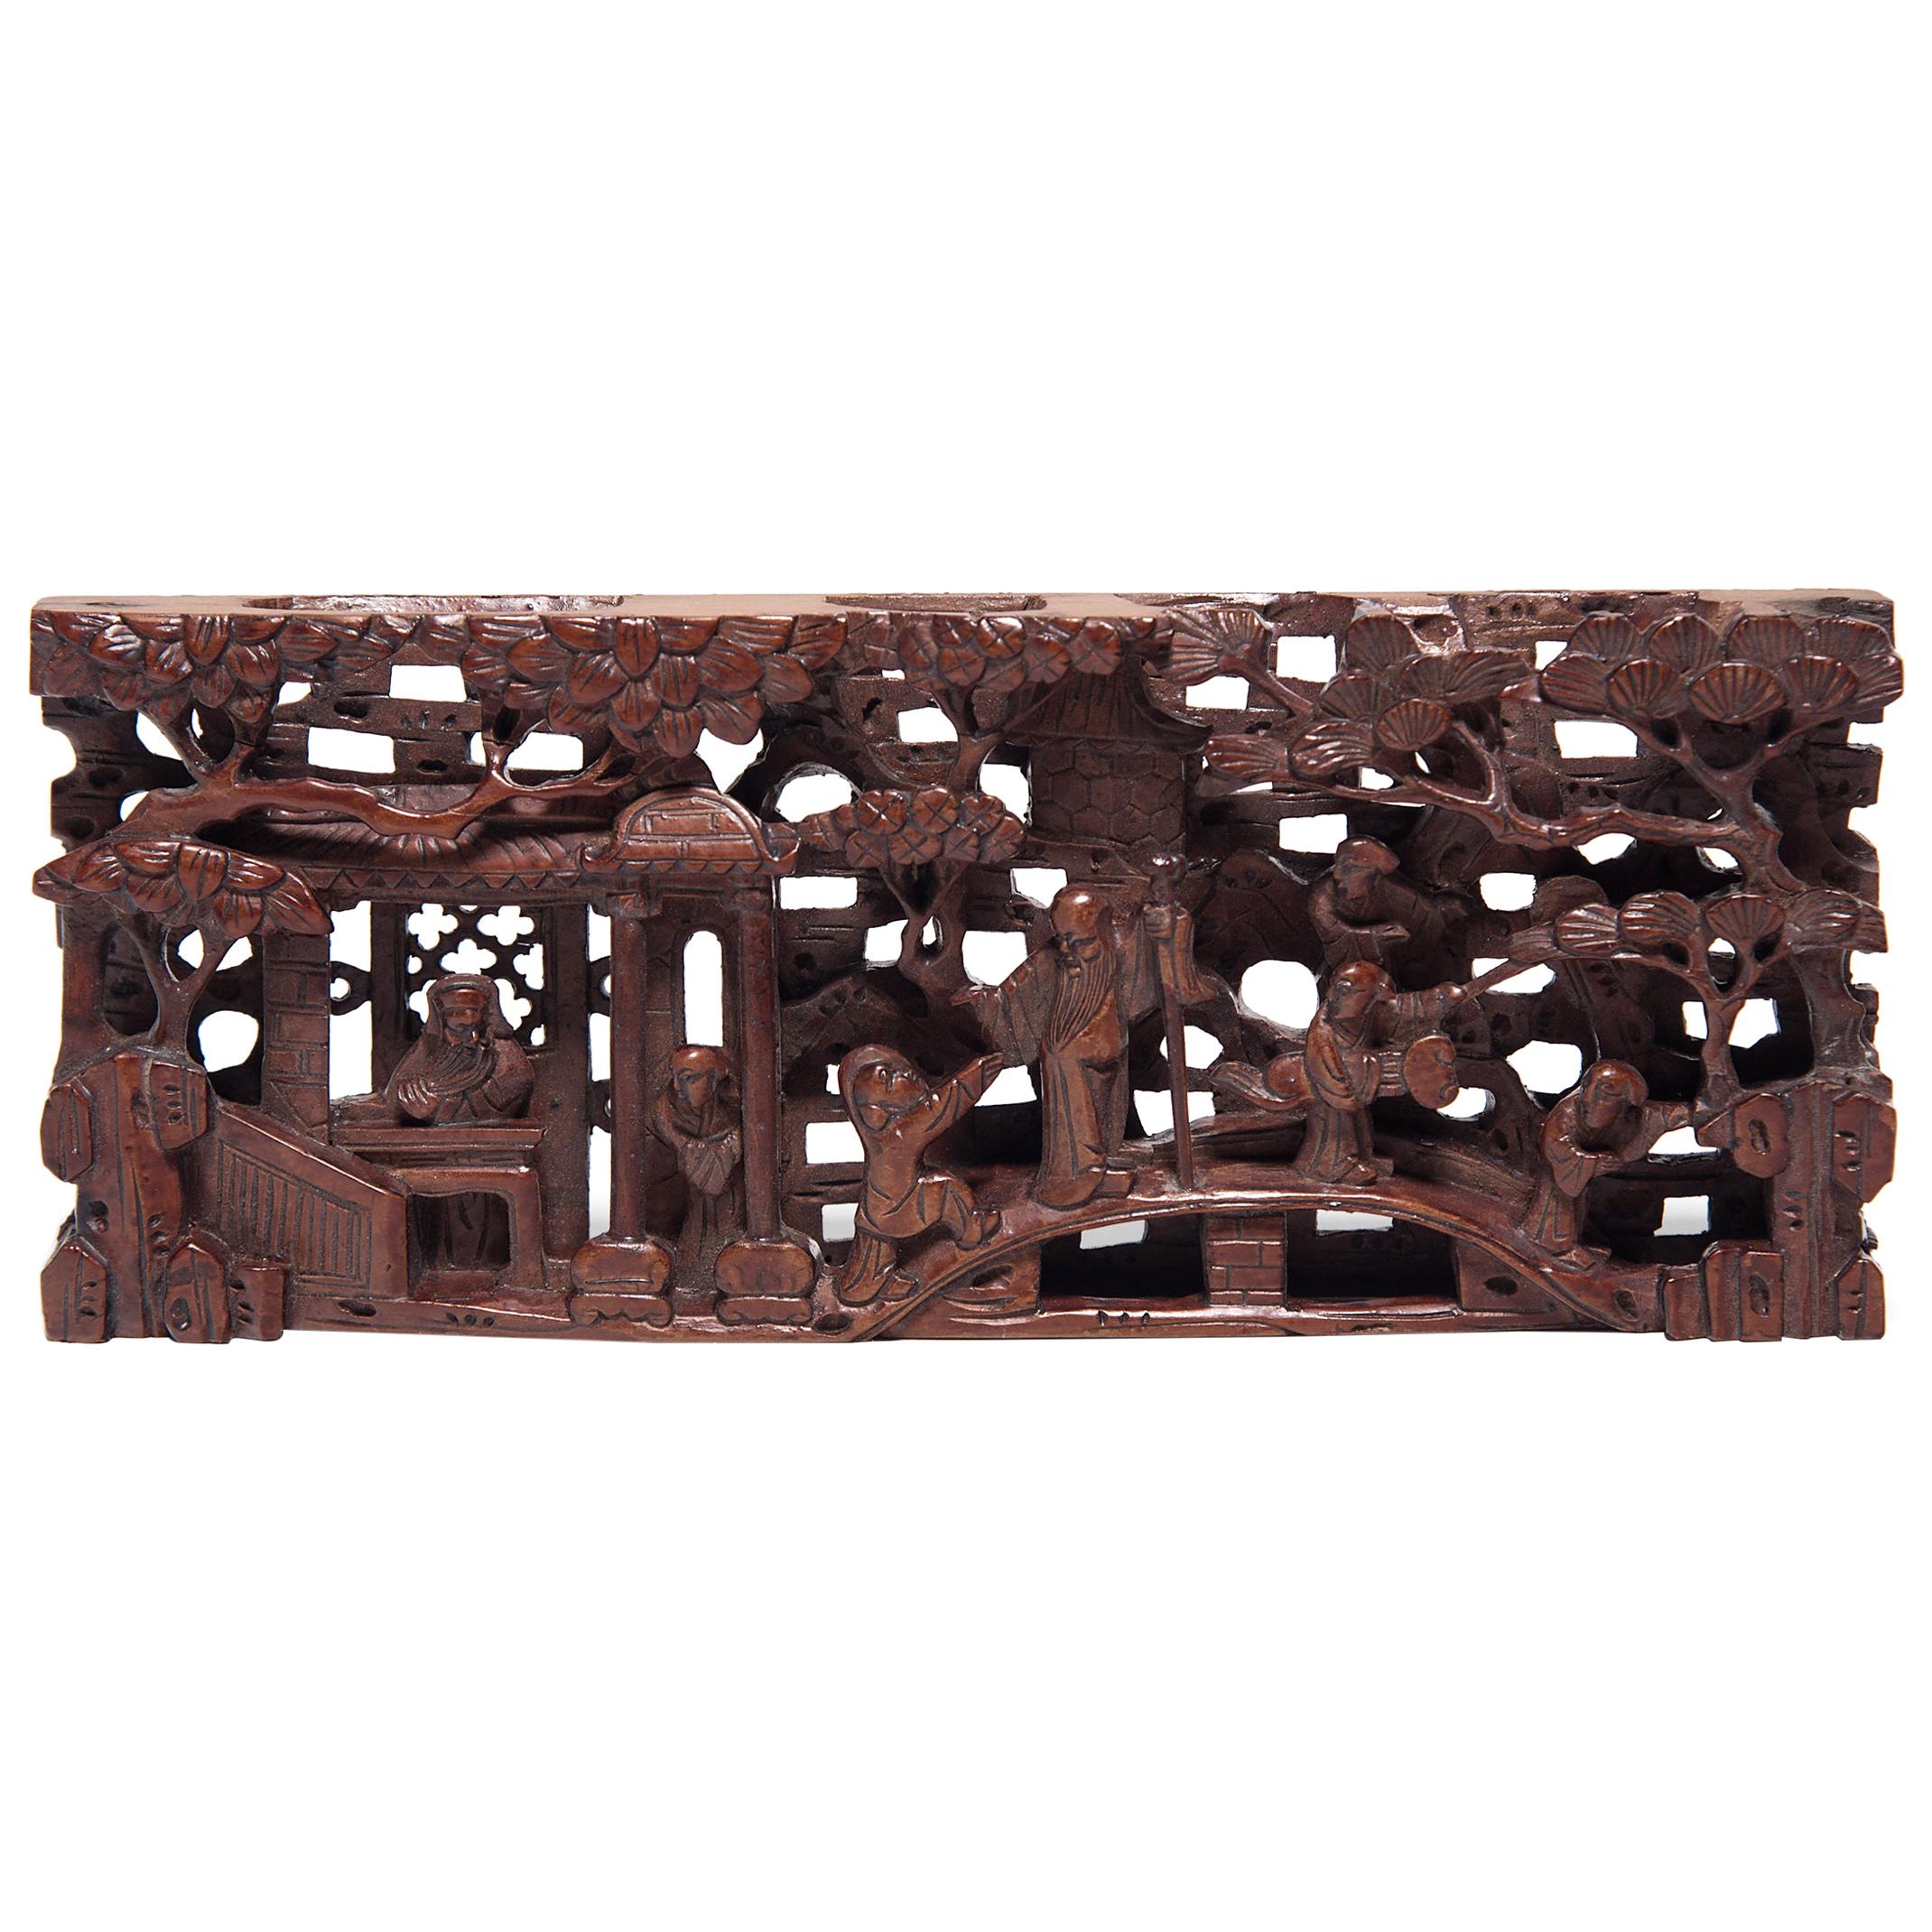 Chinese Pierced Bed Panel Carving, circa 1850